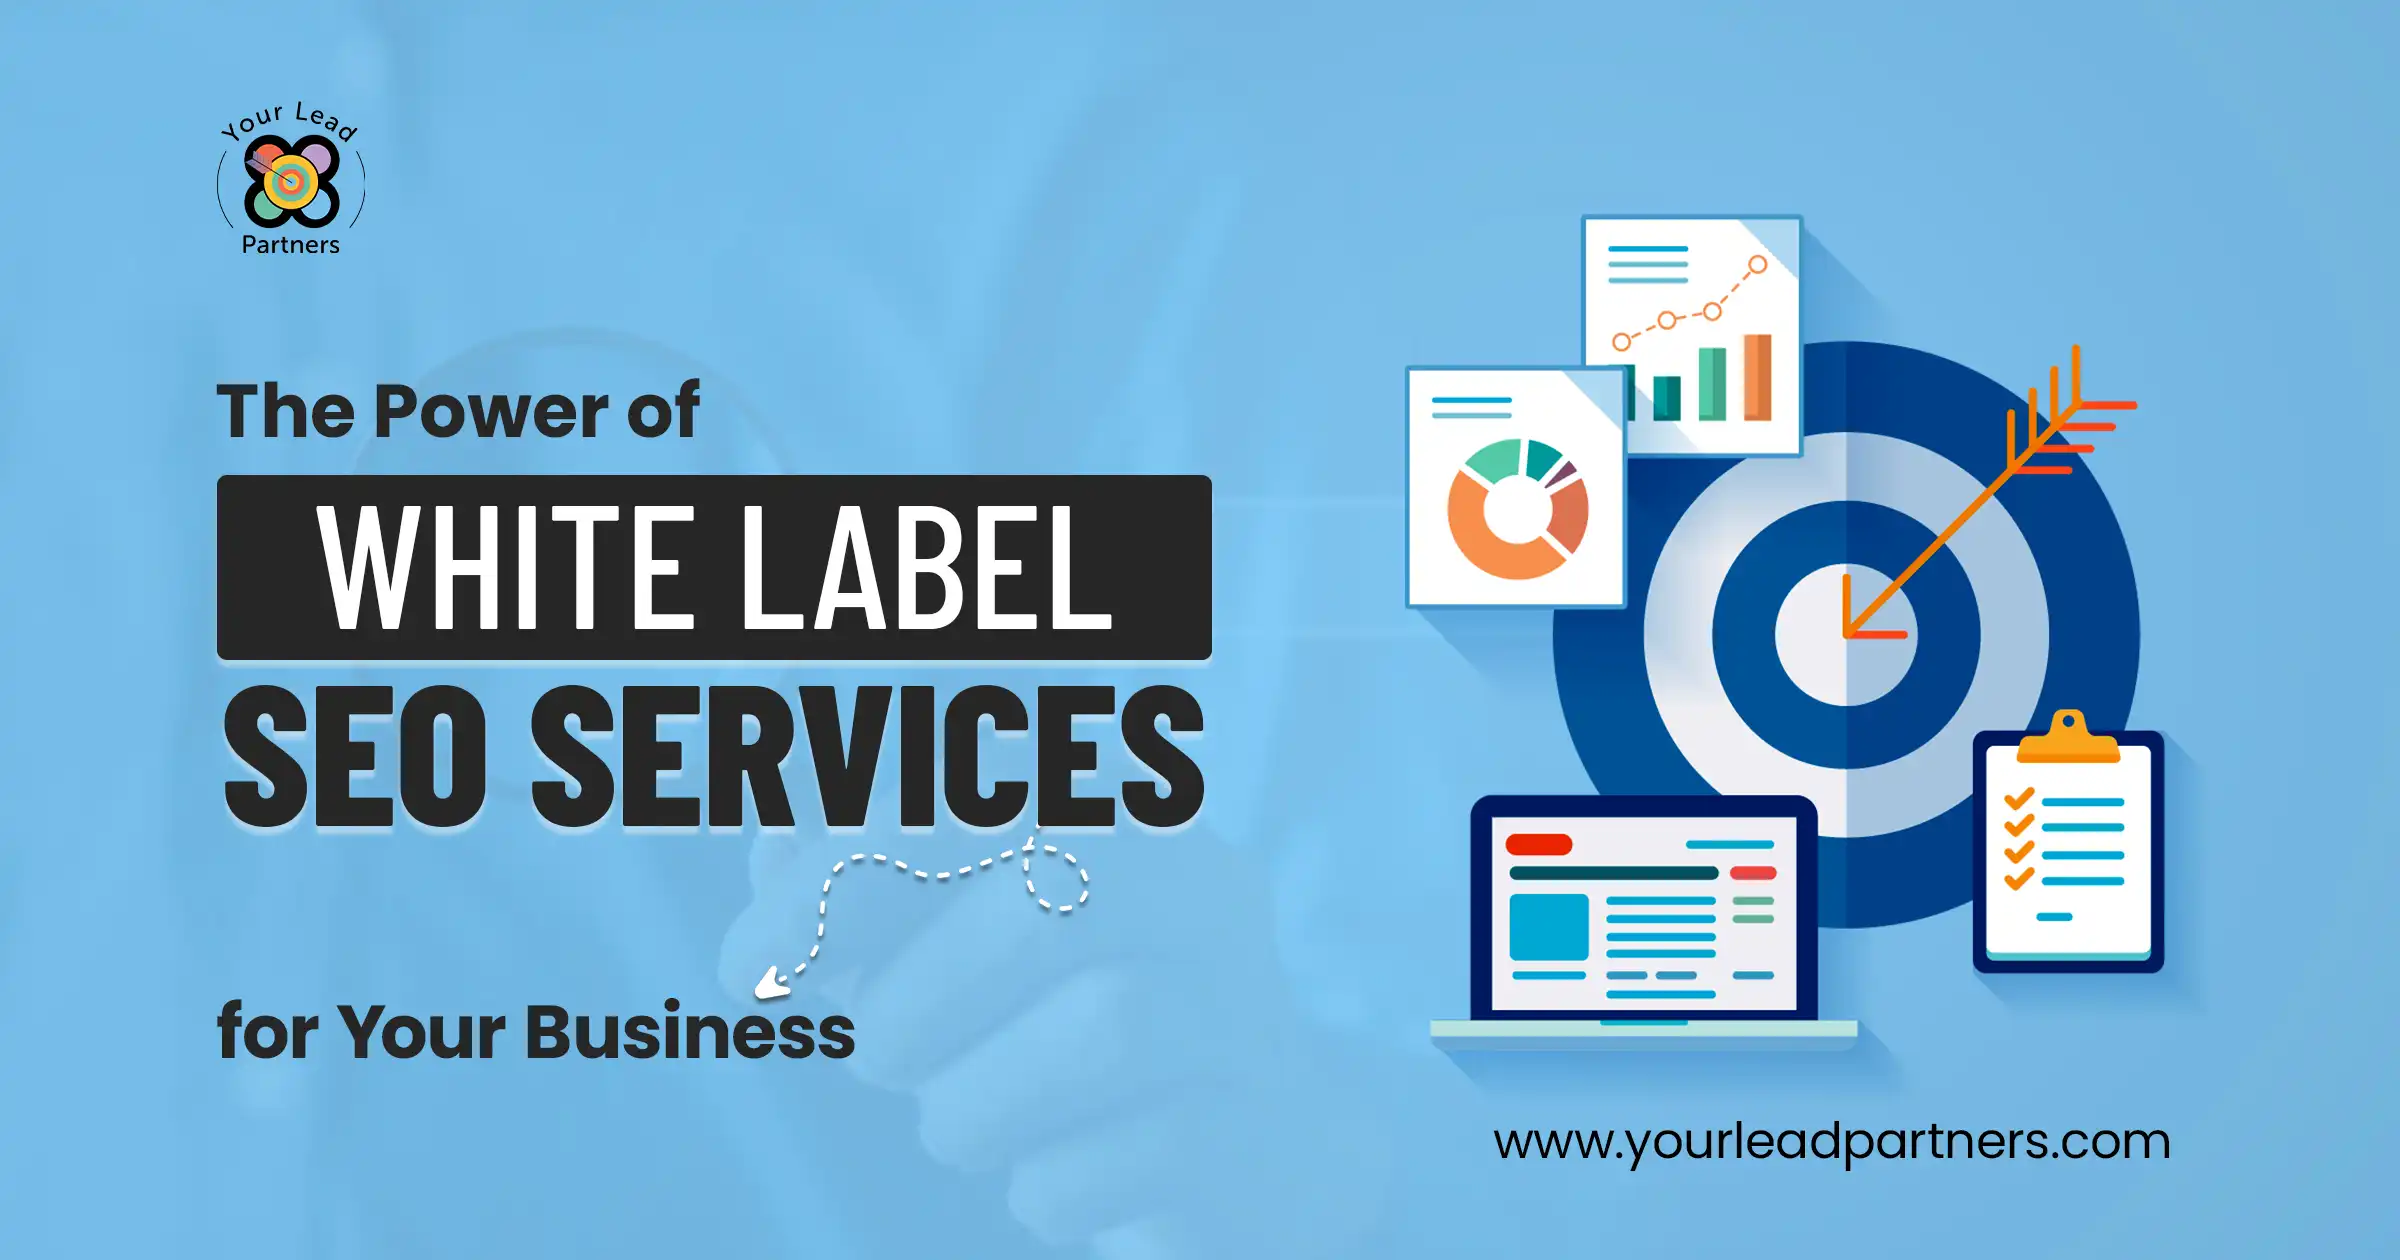 The Power of White Label SEO Services for Your Business